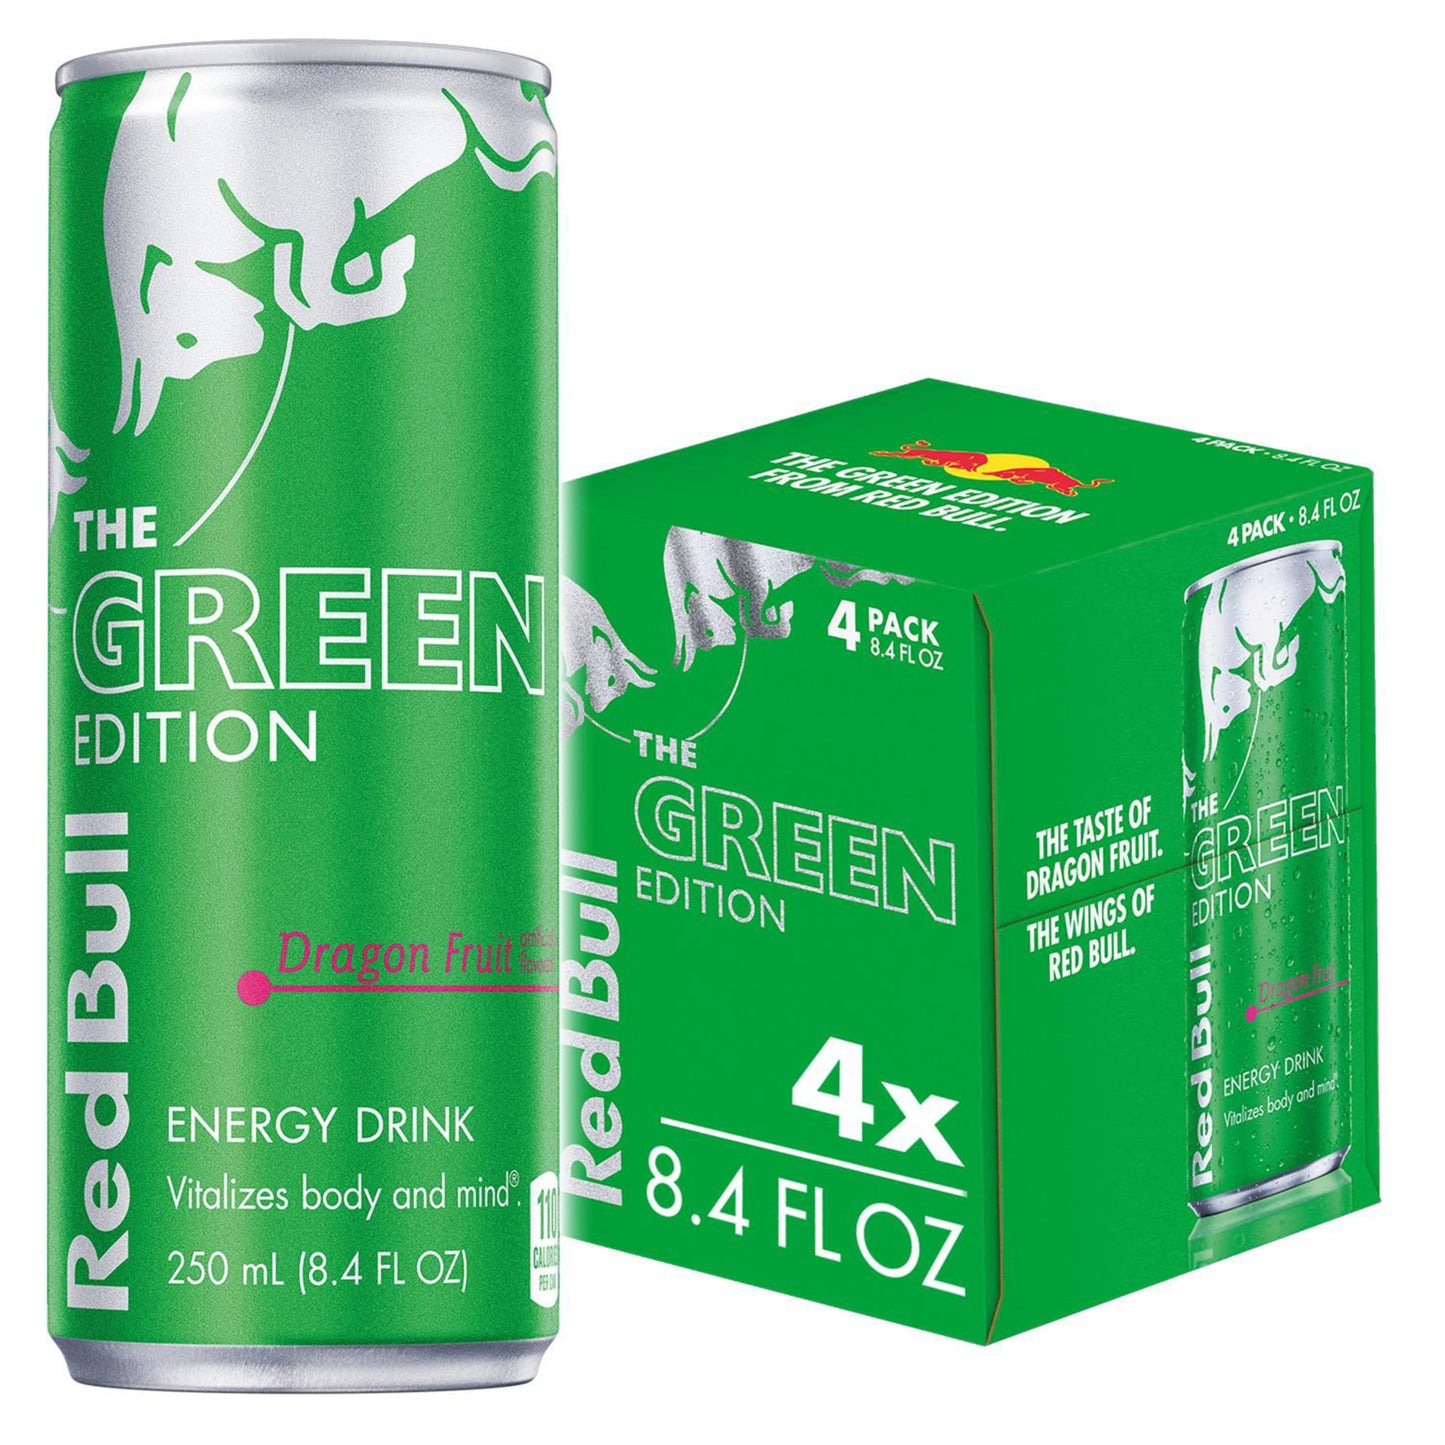 Red Bull Green Edition Dragon Fruit Energy Drink, 8.4 fl oz, Pack of 4 Cans